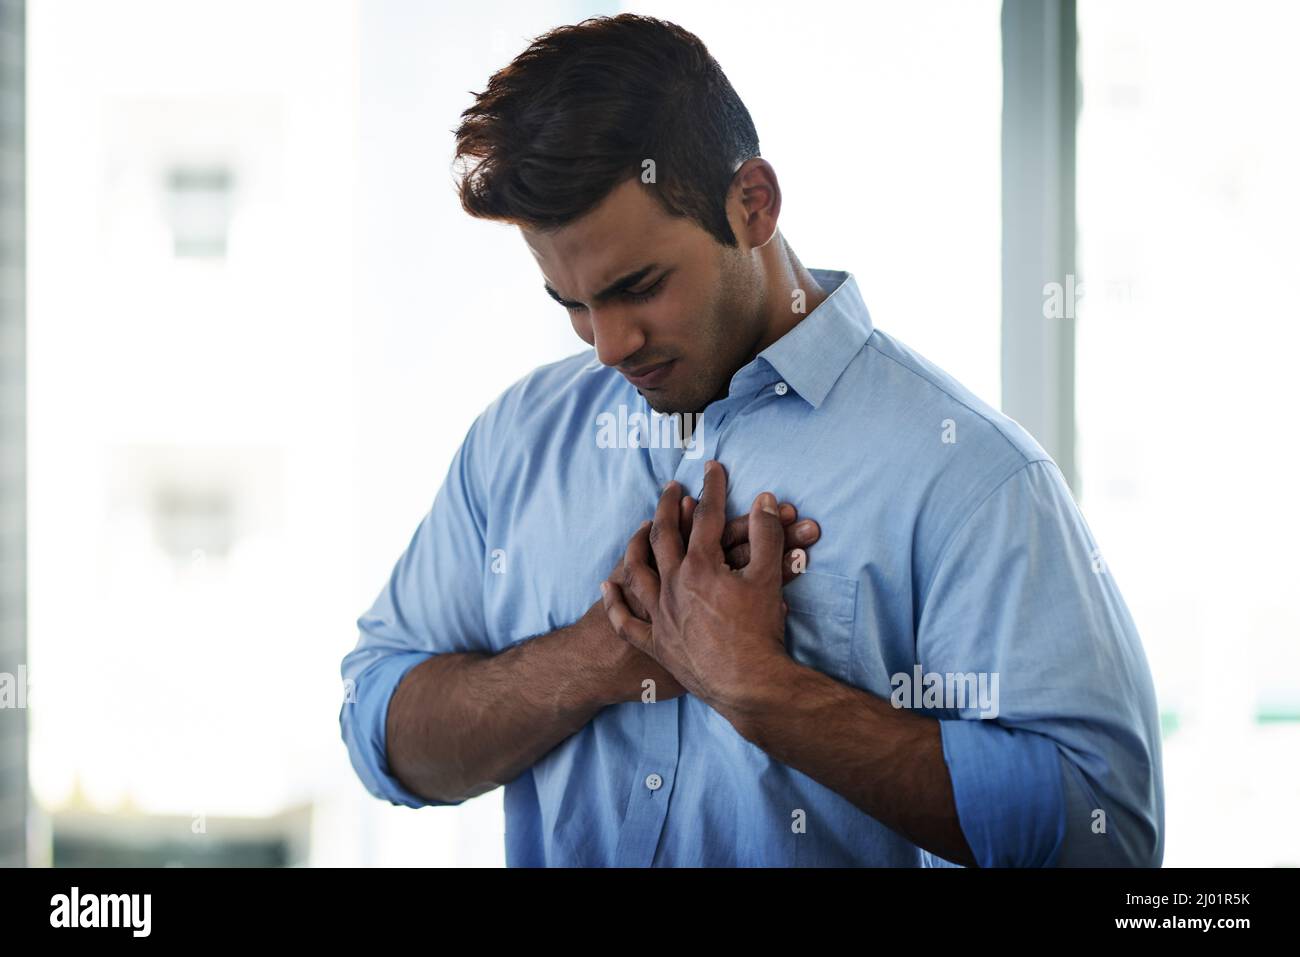 Reoccurring pain should be treated immediately. Shot of a young businessman suffering with chest pain at work. Stock Photo